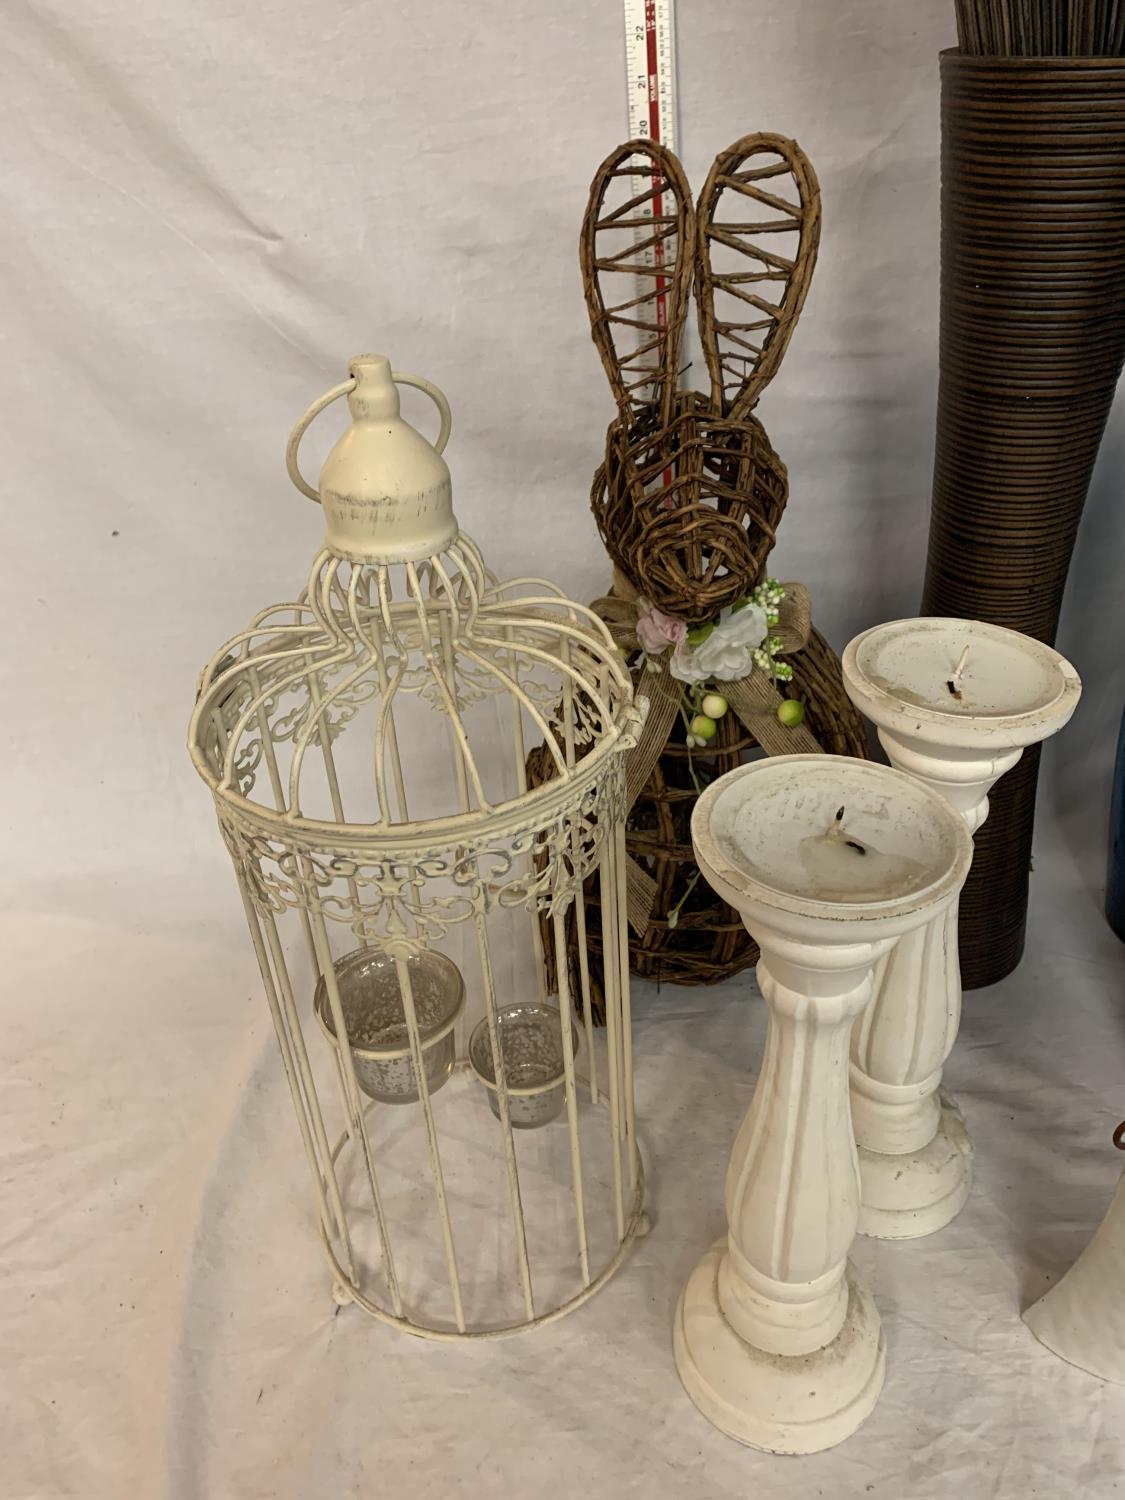 THREE VASES, A PAIR OF WOODEN CANDLE STICKS, AN INDIAN STYLE CANDLE STICK, A TEA LIGHT BIRD CAGE ETC - Image 2 of 4